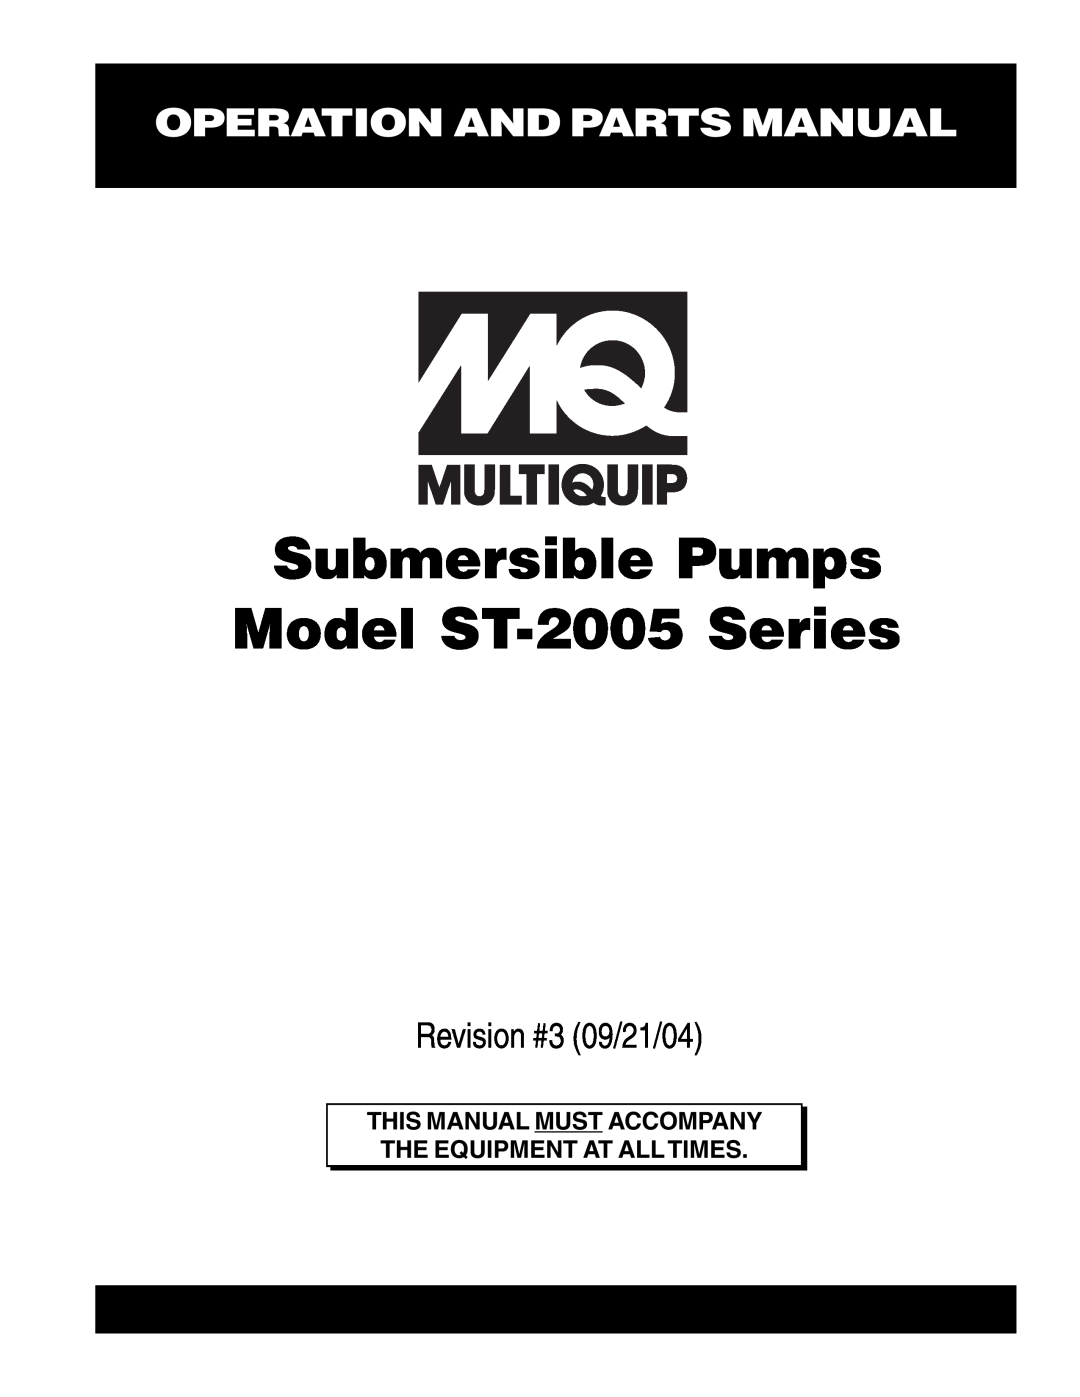 Multiquip manual Operation And Parts Manual, Submersible Pumps Model ST-2005 Series, Revision #3 09/21/04 